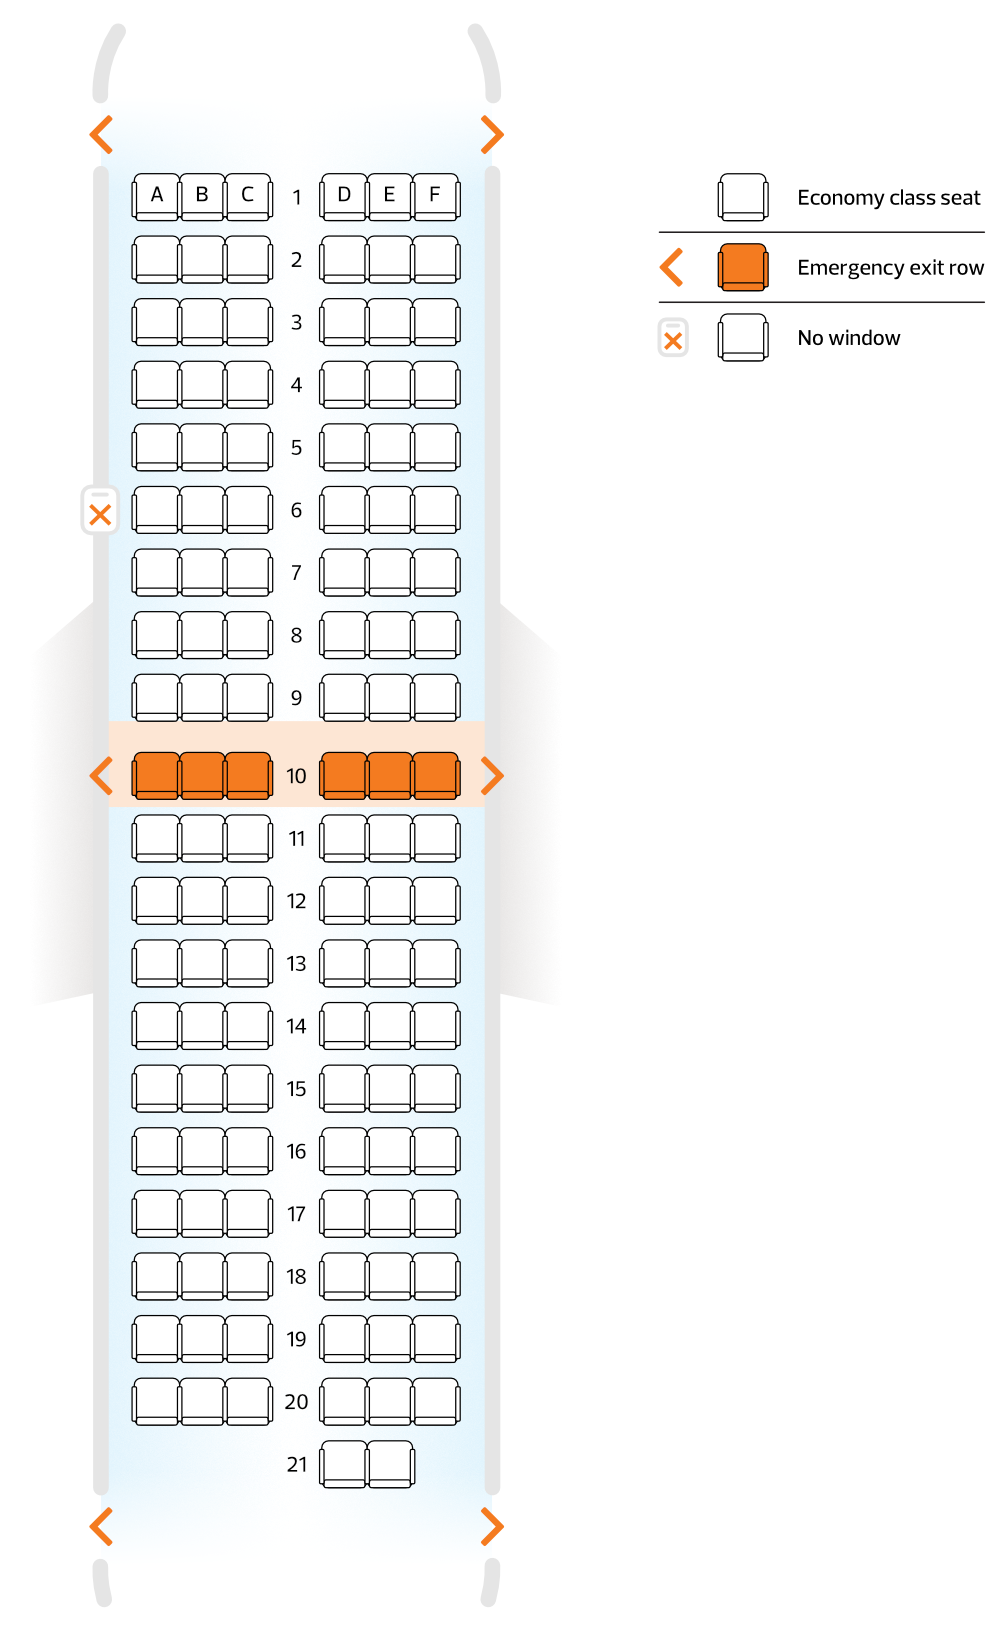 Swoop 737 800 Seat Map